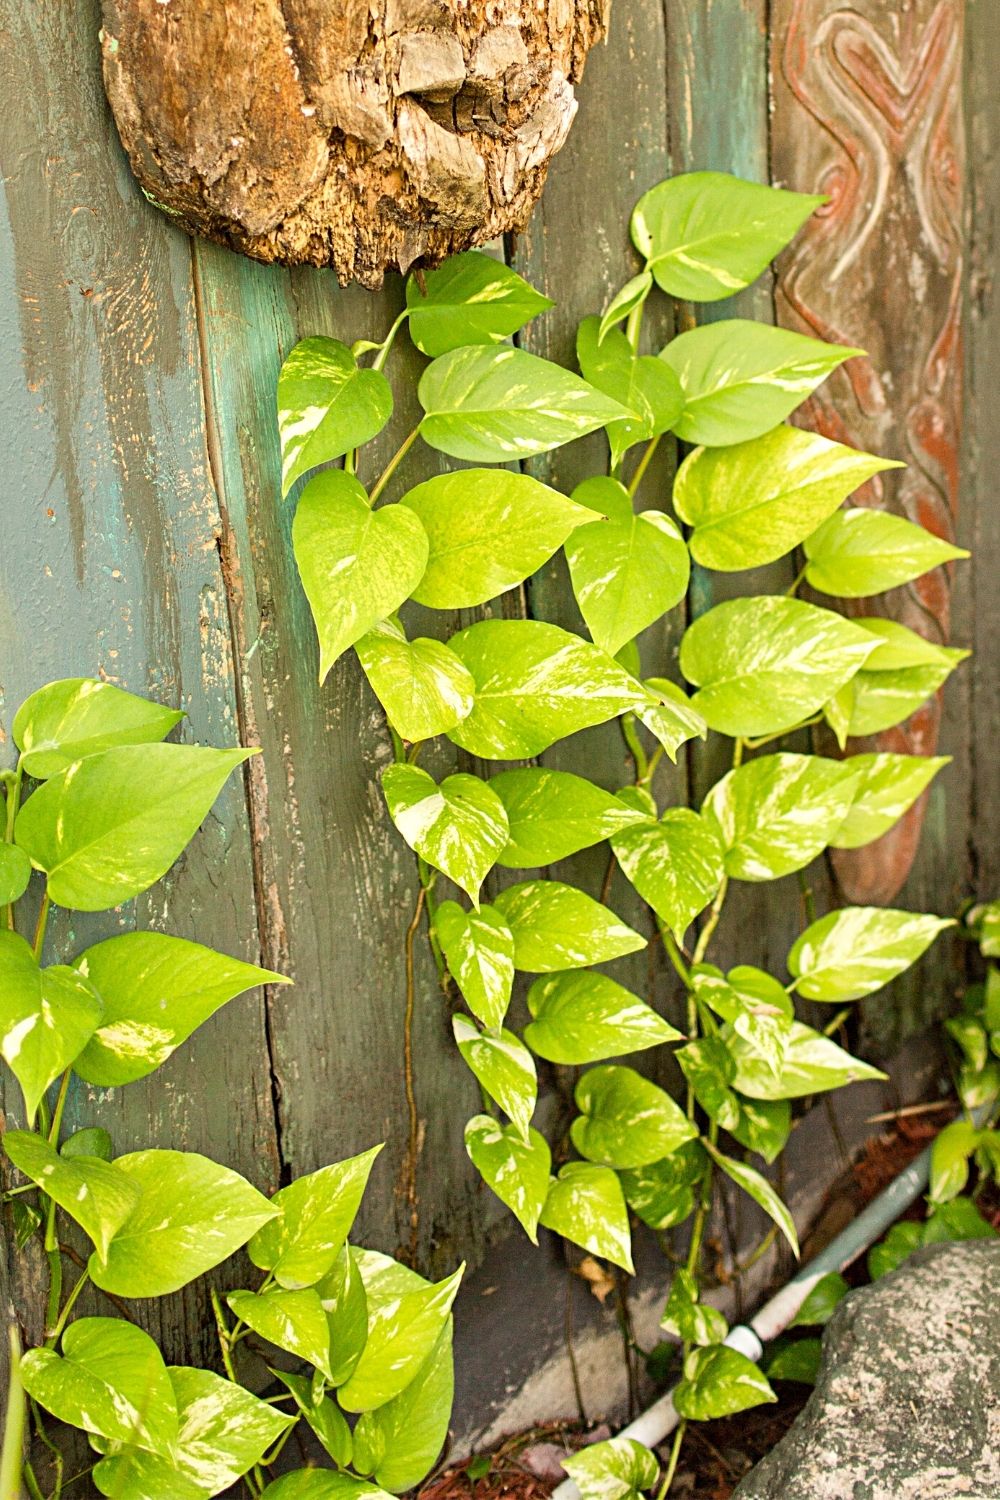 The Golden Pothos is another great plant to grow in a closed terrarium as it grows swiftly